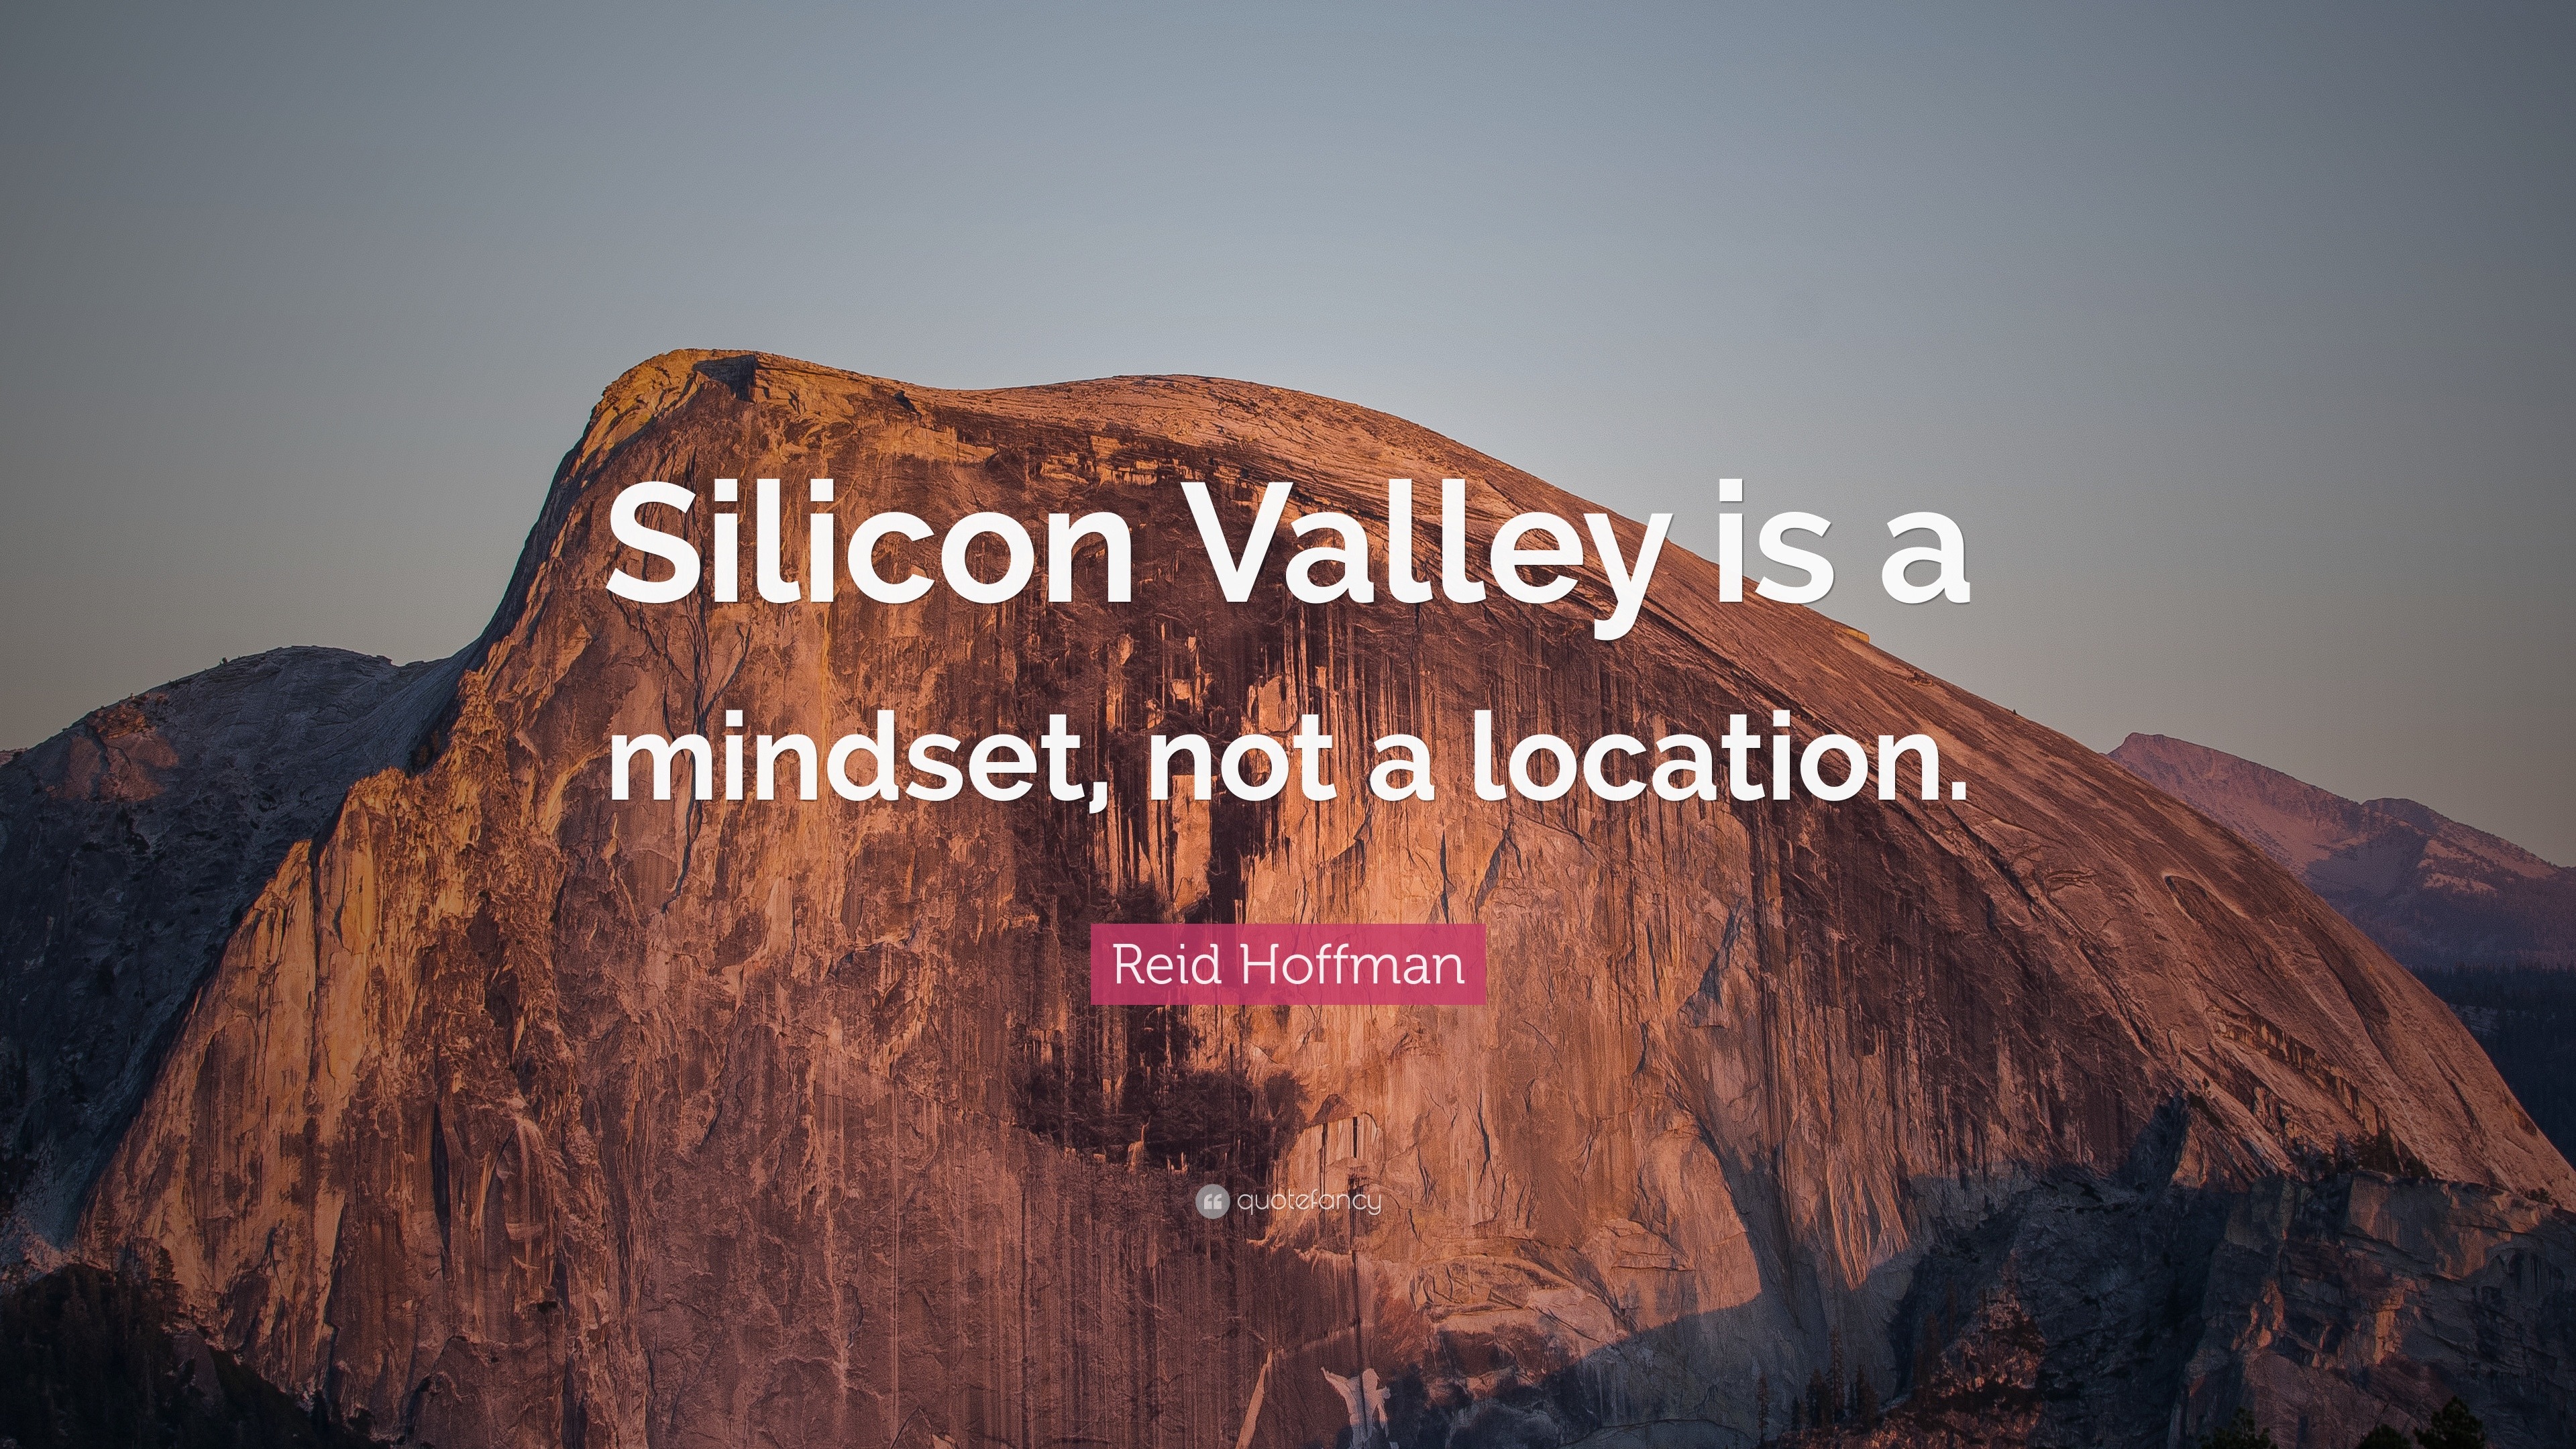 Reid Hoffman Quote: “Silicon Valley is a mindset, not a location.”